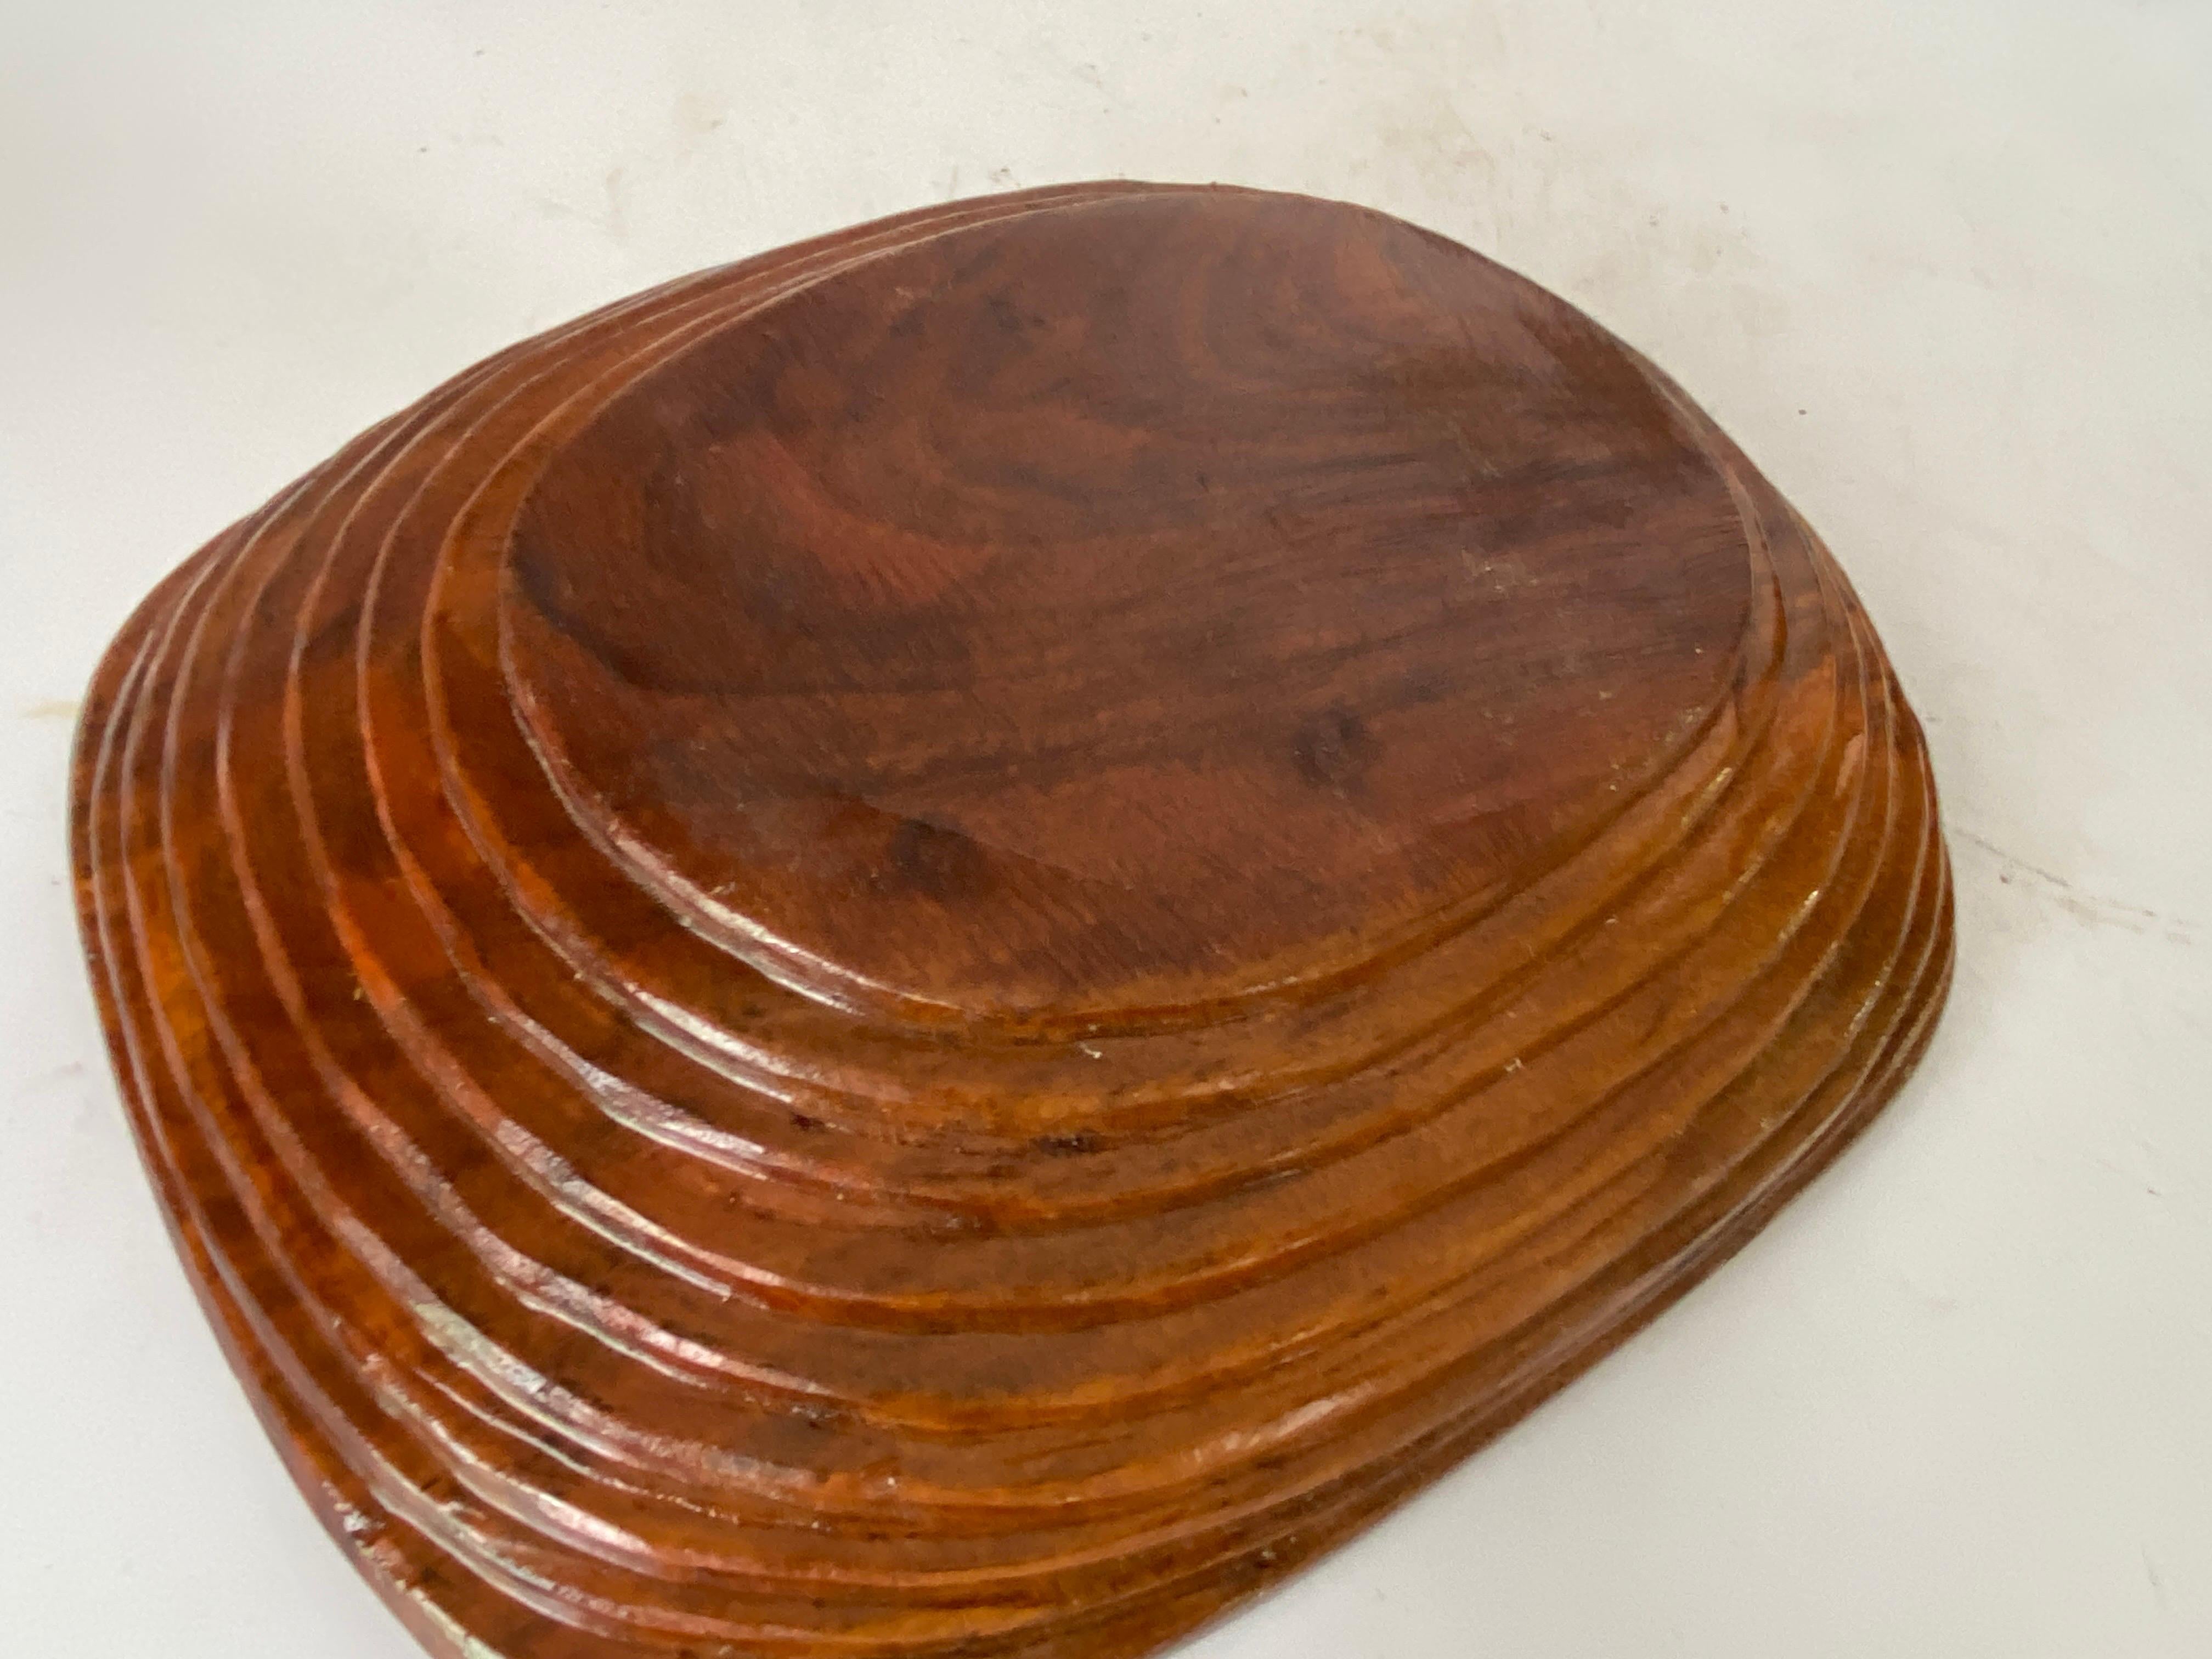 This dish is typical from the Minimalist style from the years 1960s. It has been done in France. Brown Color.